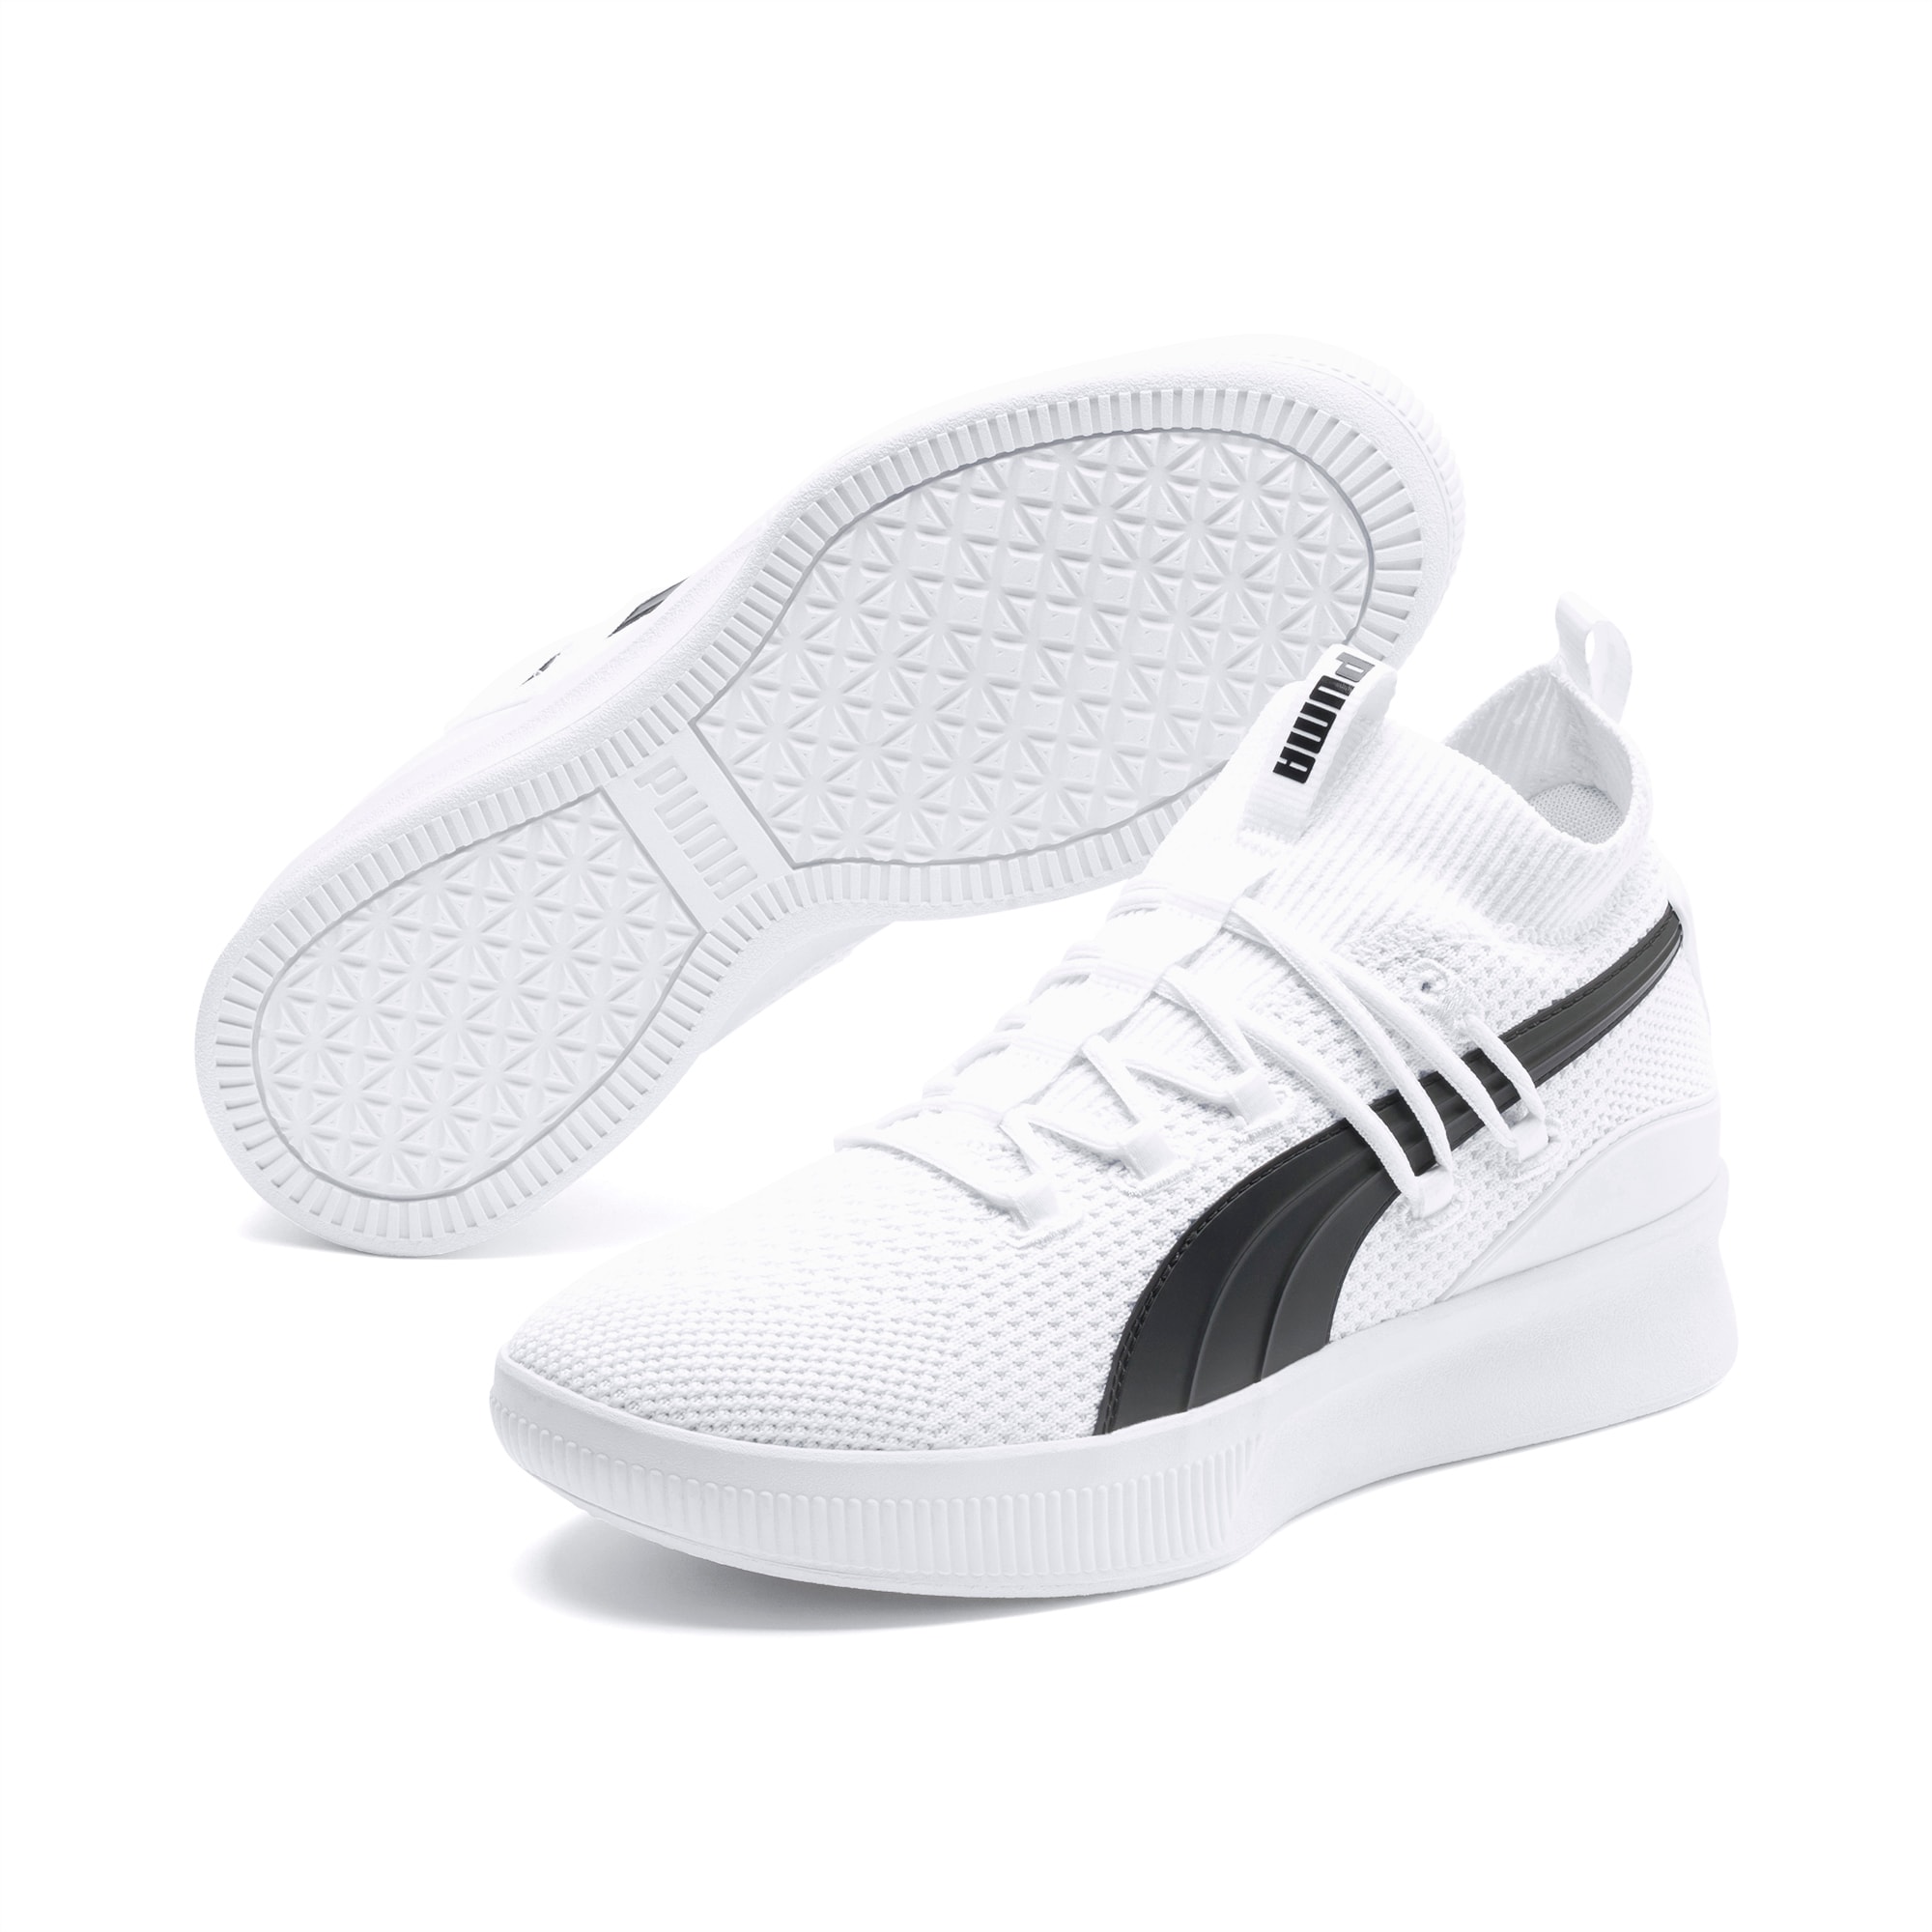 clyde court city pack basketball shoes